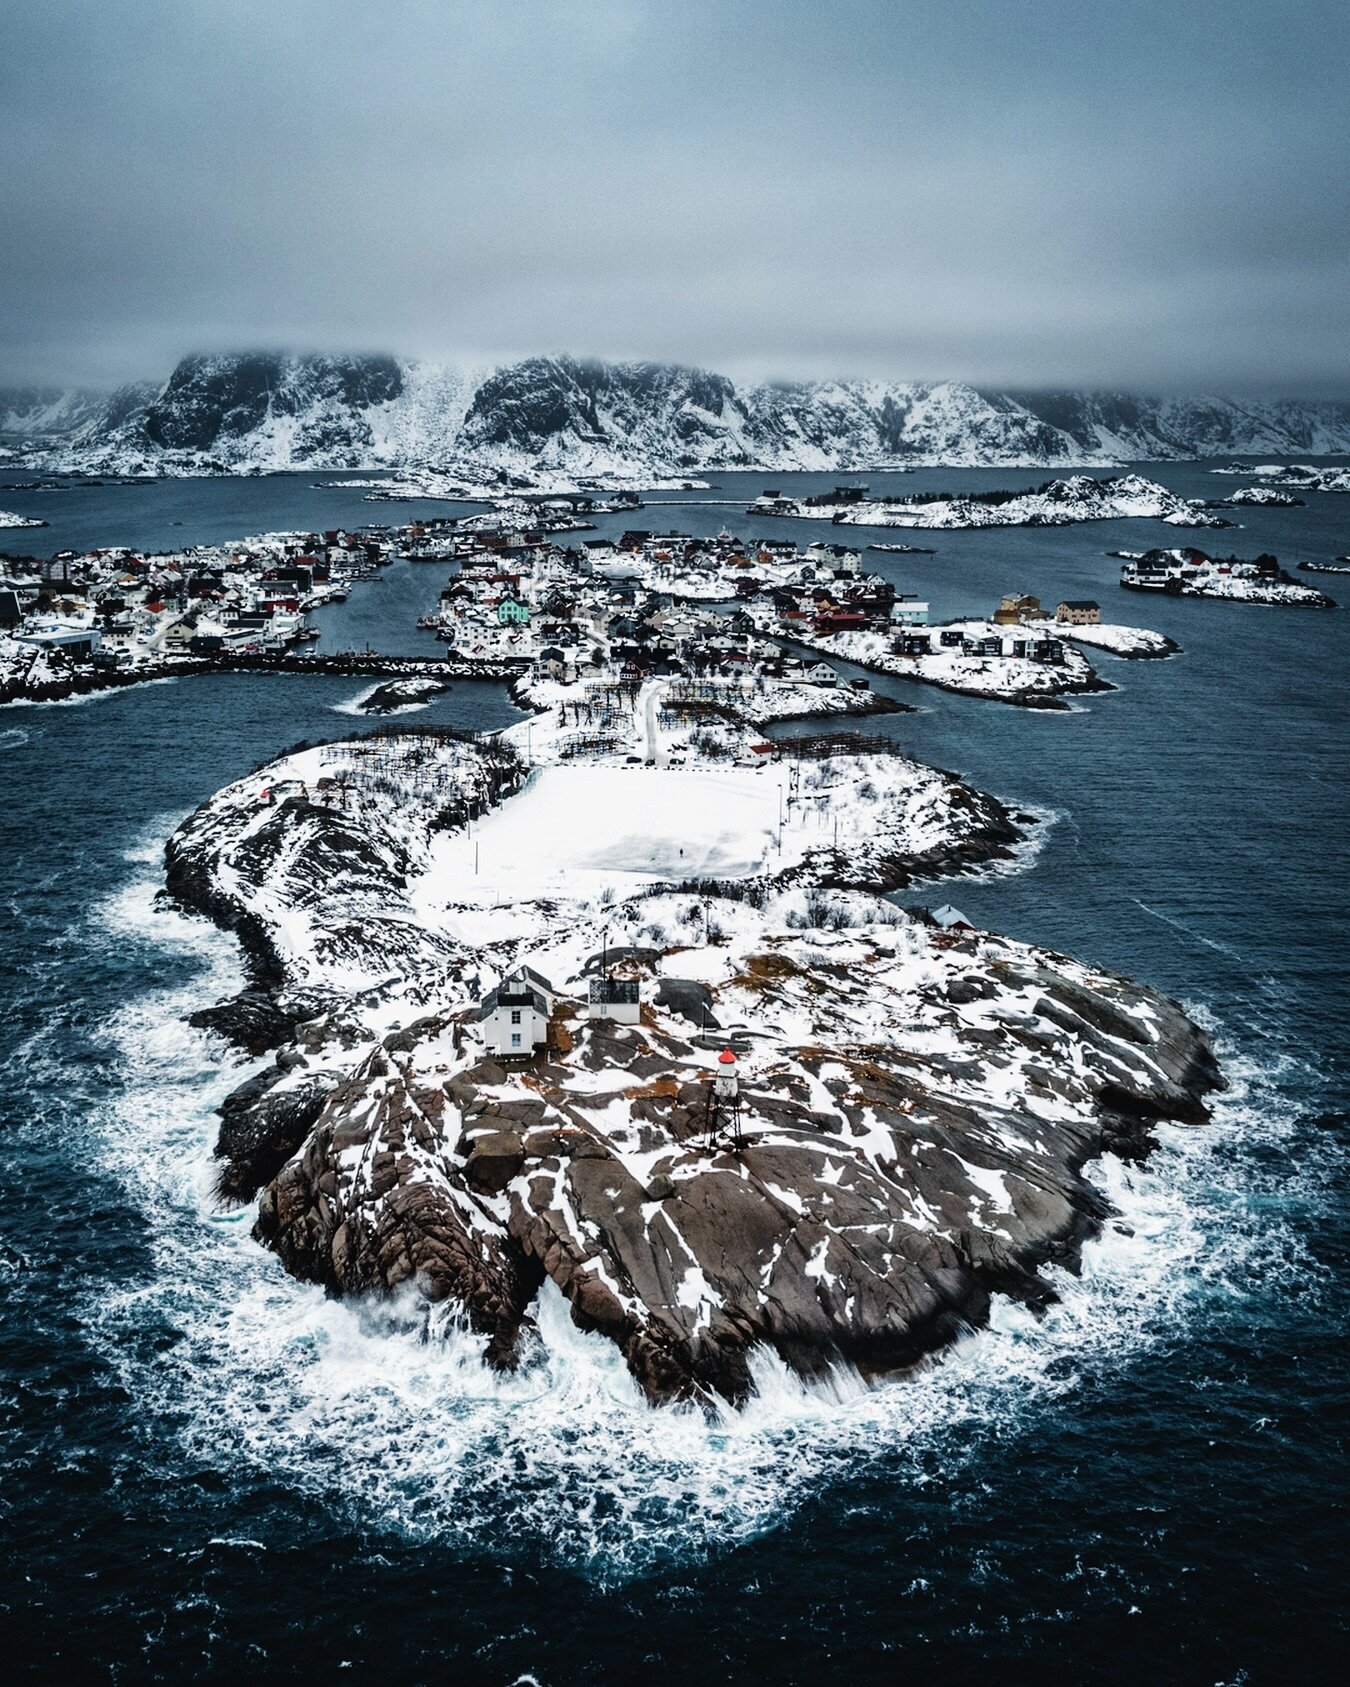 You&rsquo;ve probably seen photos of that location before. It is very popular amongst drone photographers and for a good reason. The soccer field that sits in the middle of that tiny island at the edge of Henningsv&aelig;r certainly makes for some ve